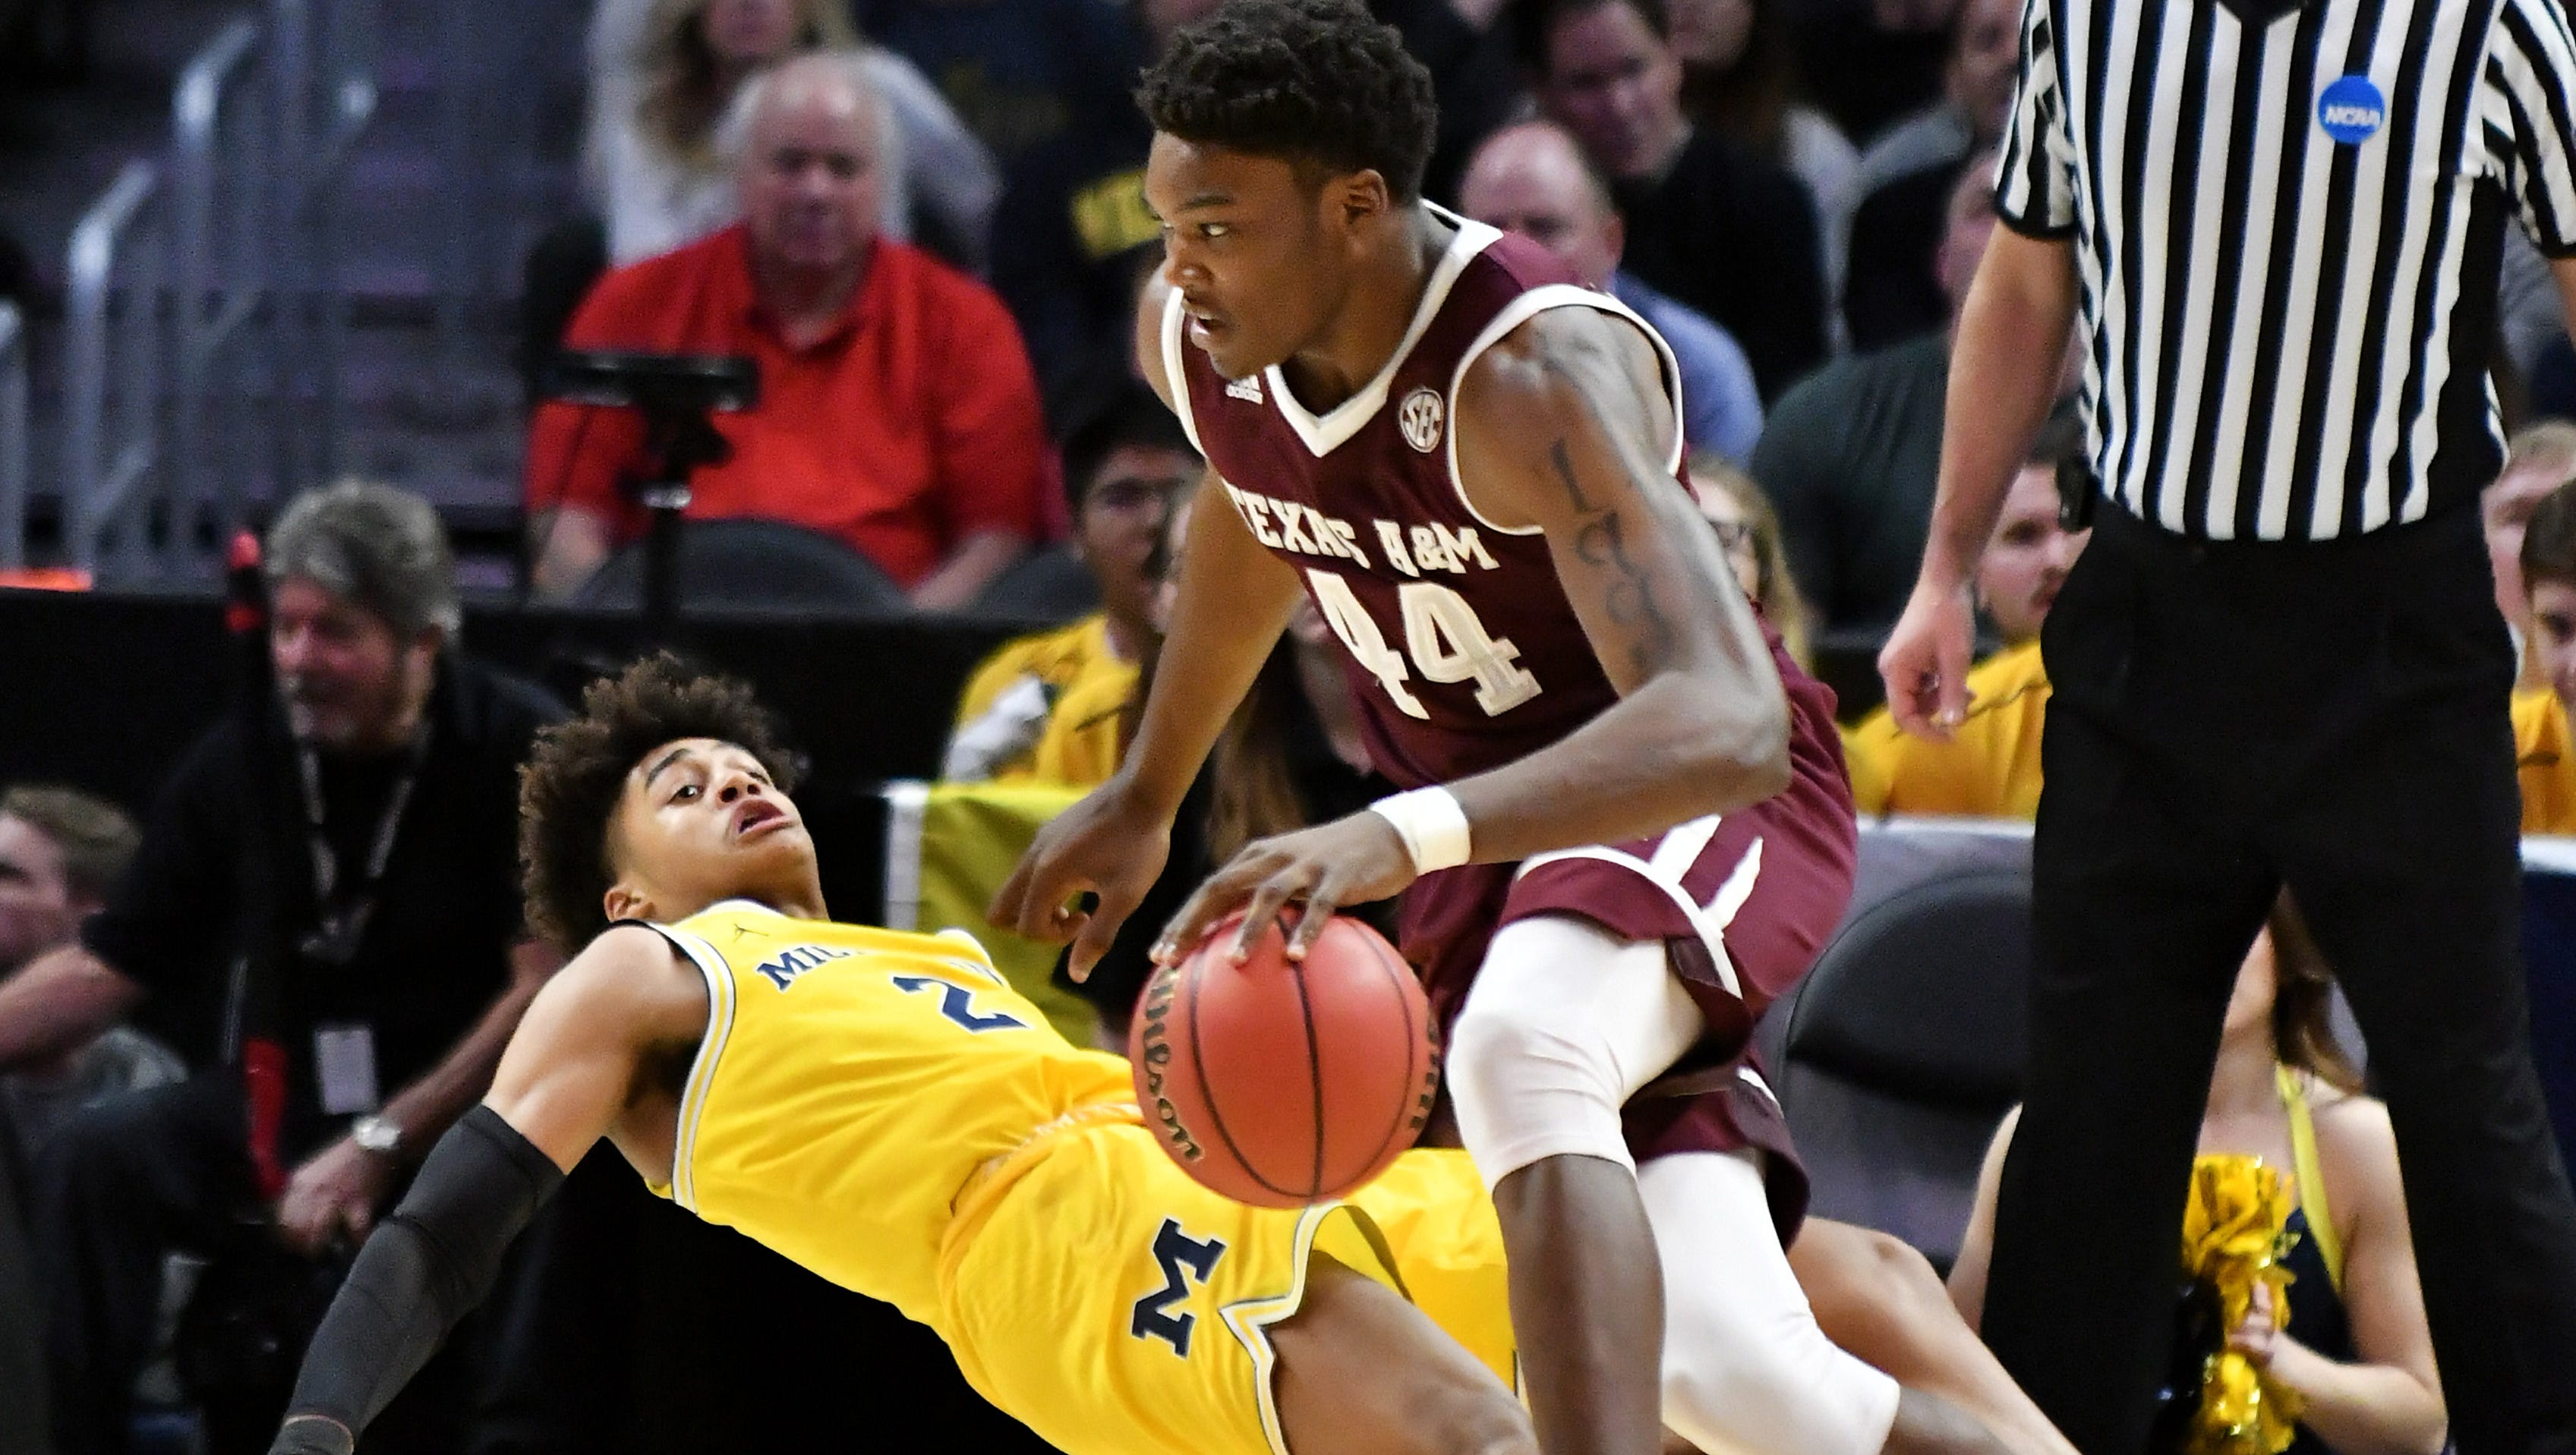 15. Washington Wizards: Robert Williams, PF/C, Soph., Texas A&M. They’re overdue to be looking for a replacement for starting center Marcin Gortat and Williams, at 6-foot-10, brings some athleticism and swag to the position. He's a natural fit in the pick-and-roll game with guards John Wall and Bradley Beal, and he'd be a good transition as Gortat goes into the last year of his deal.